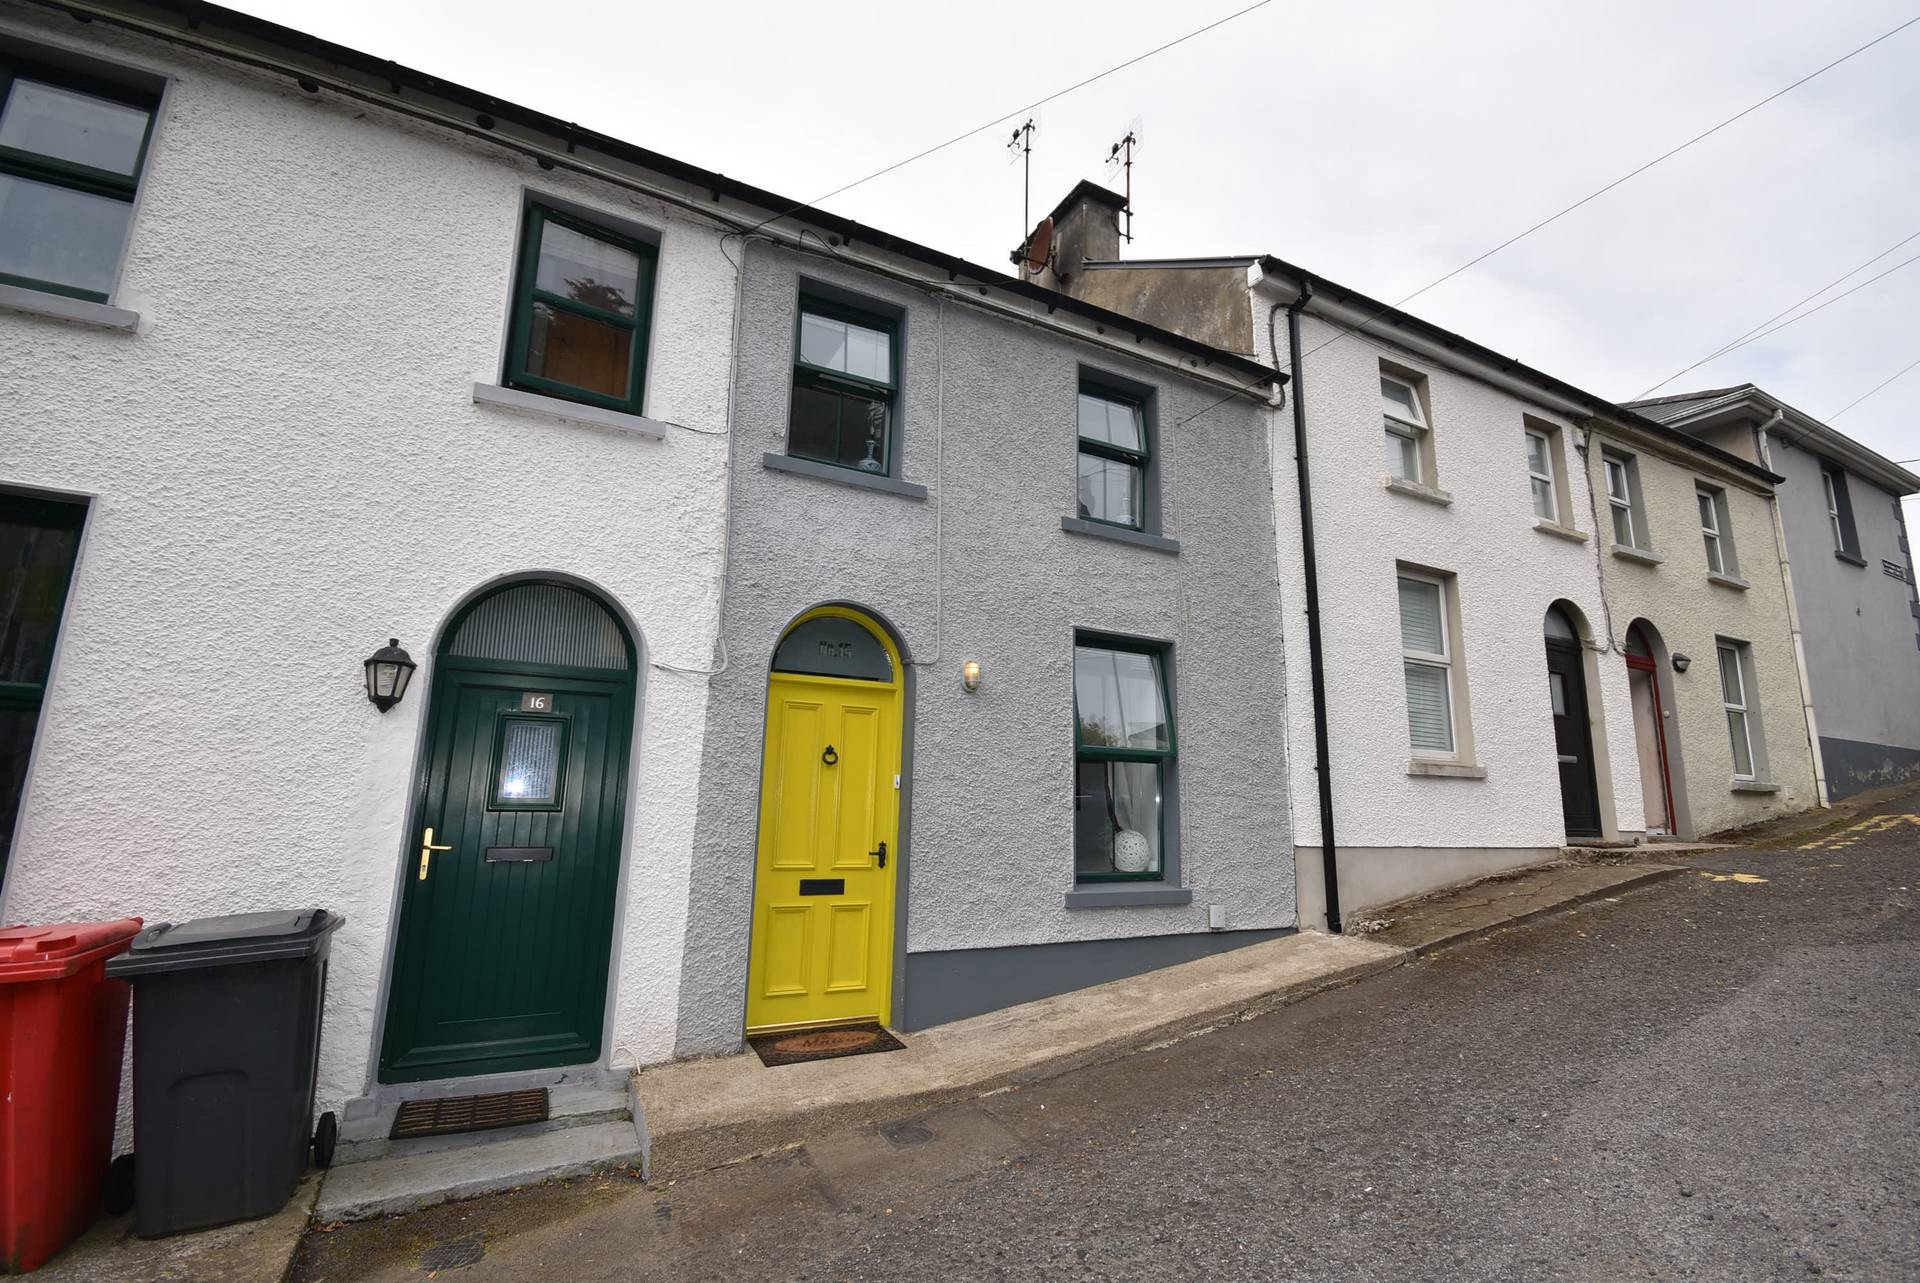 15 St. Columba’s Terrace, High Road, Letterkenny, Co. Donegal, F92 A4XC